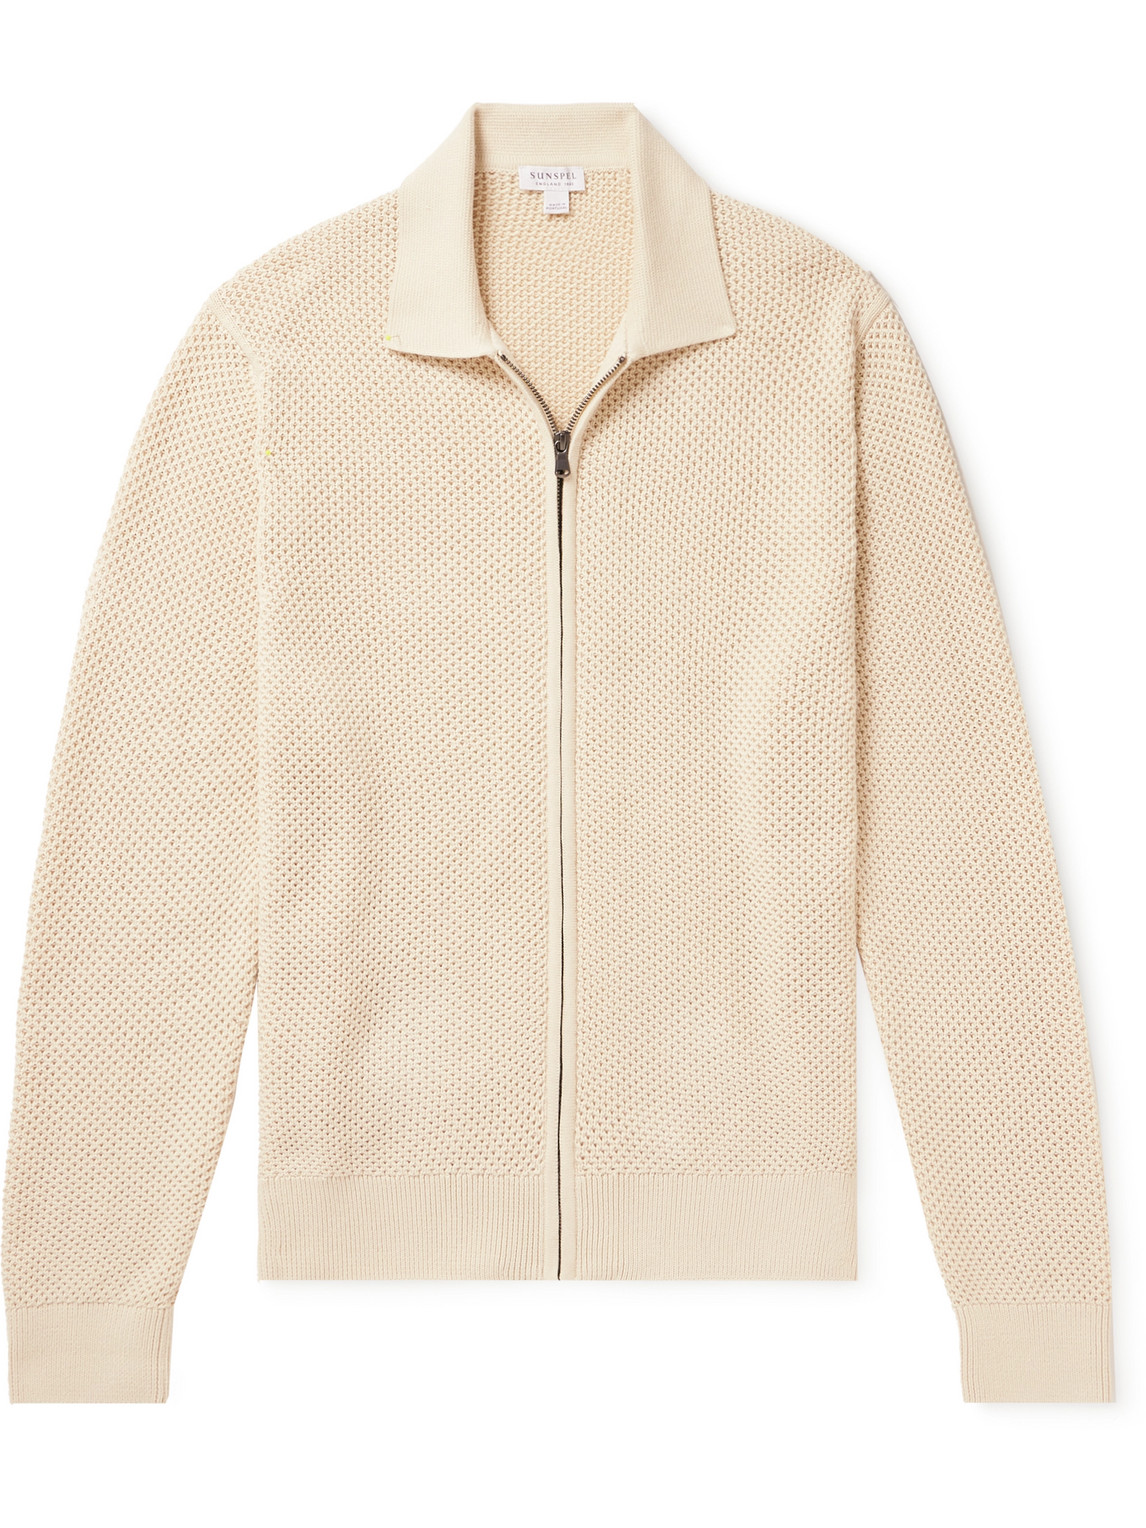 Sunspel Honeycomb-knit Cotton Zip-up Cardigan In White